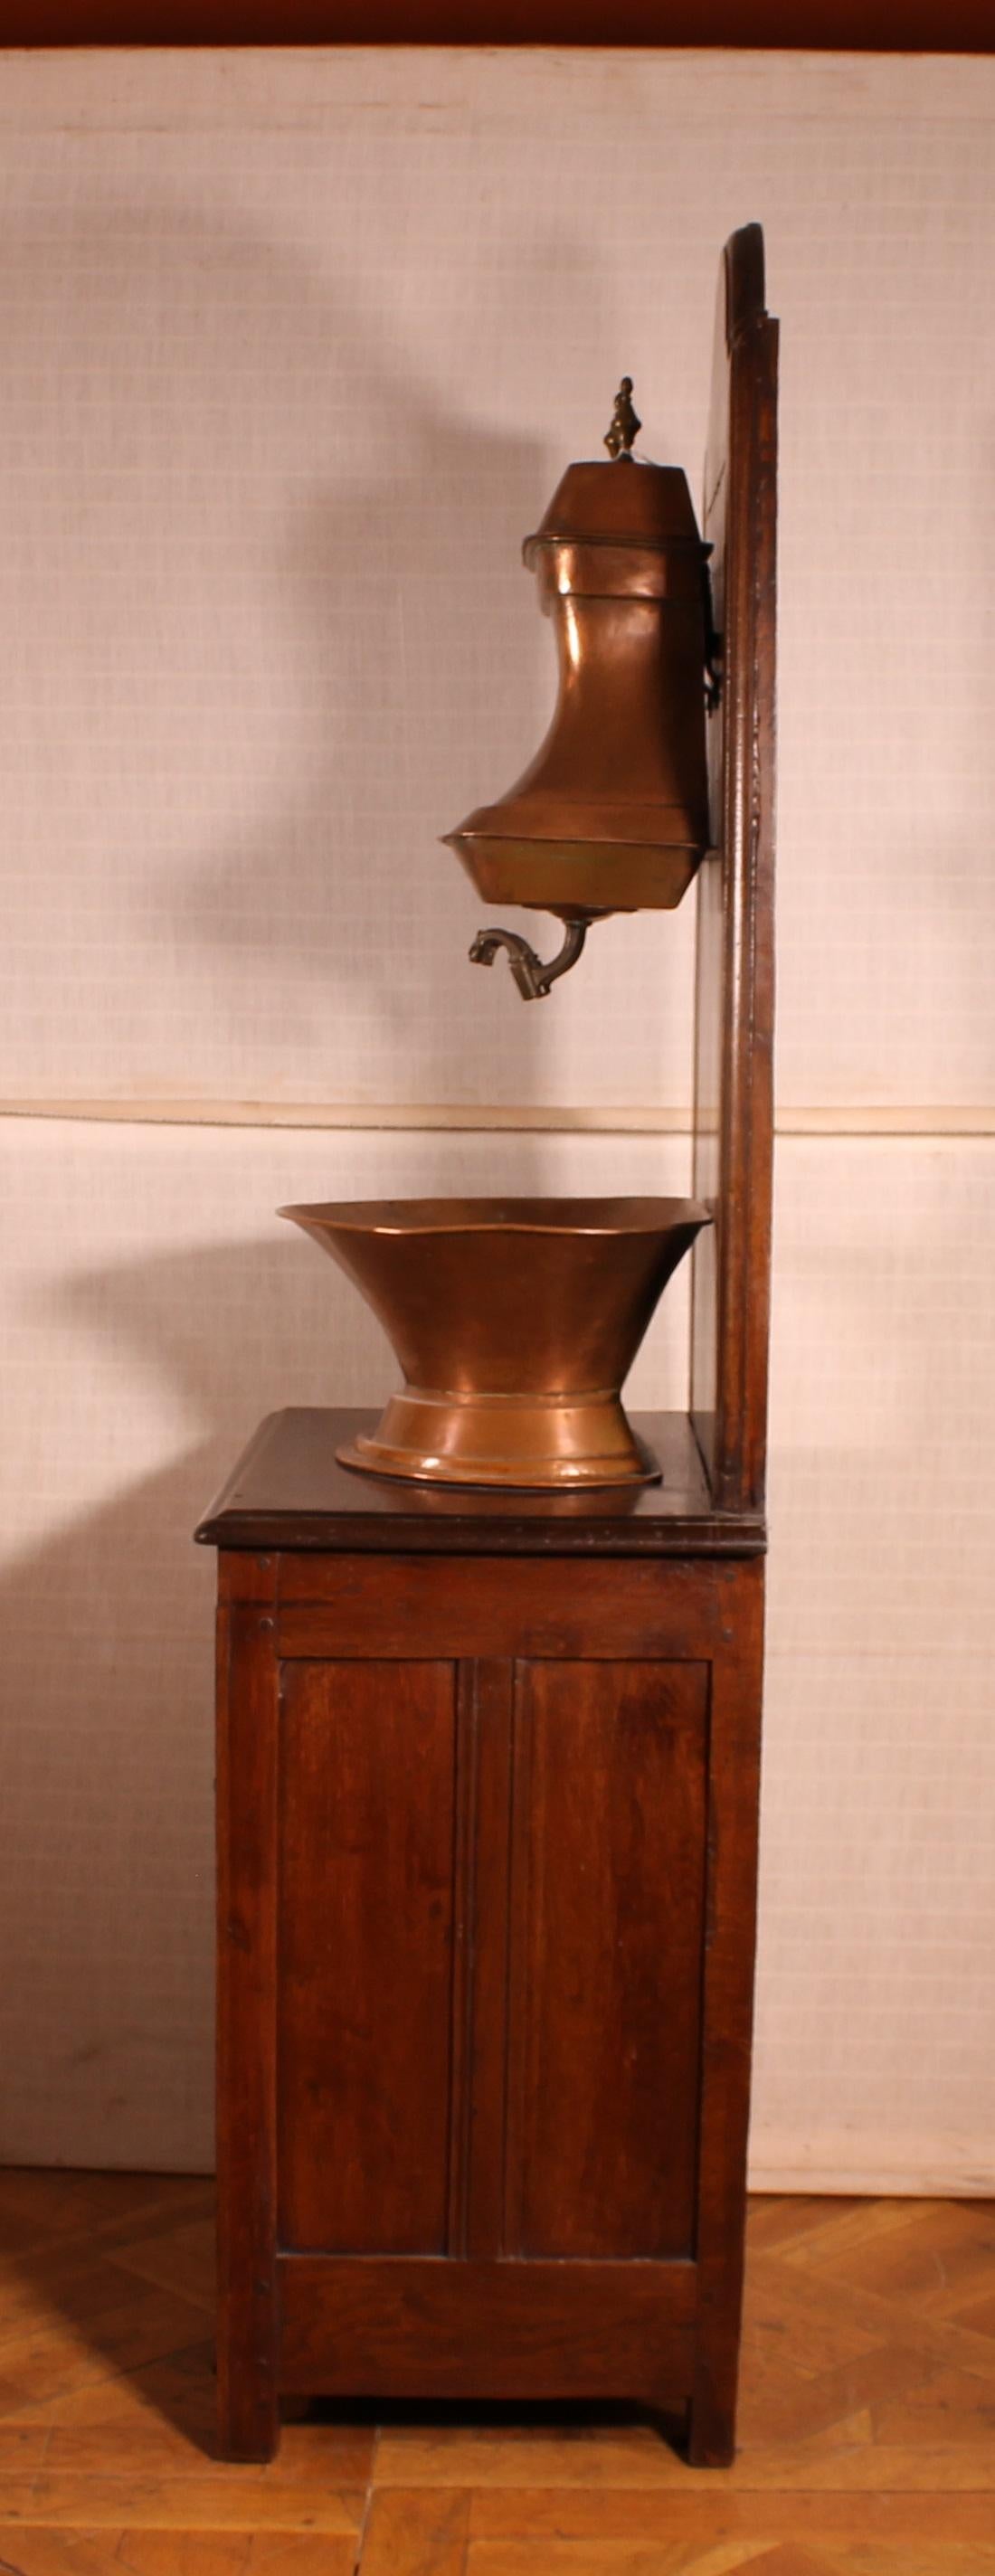 Washstand with Copper Reservoir, 19th Century, France For Sale 1